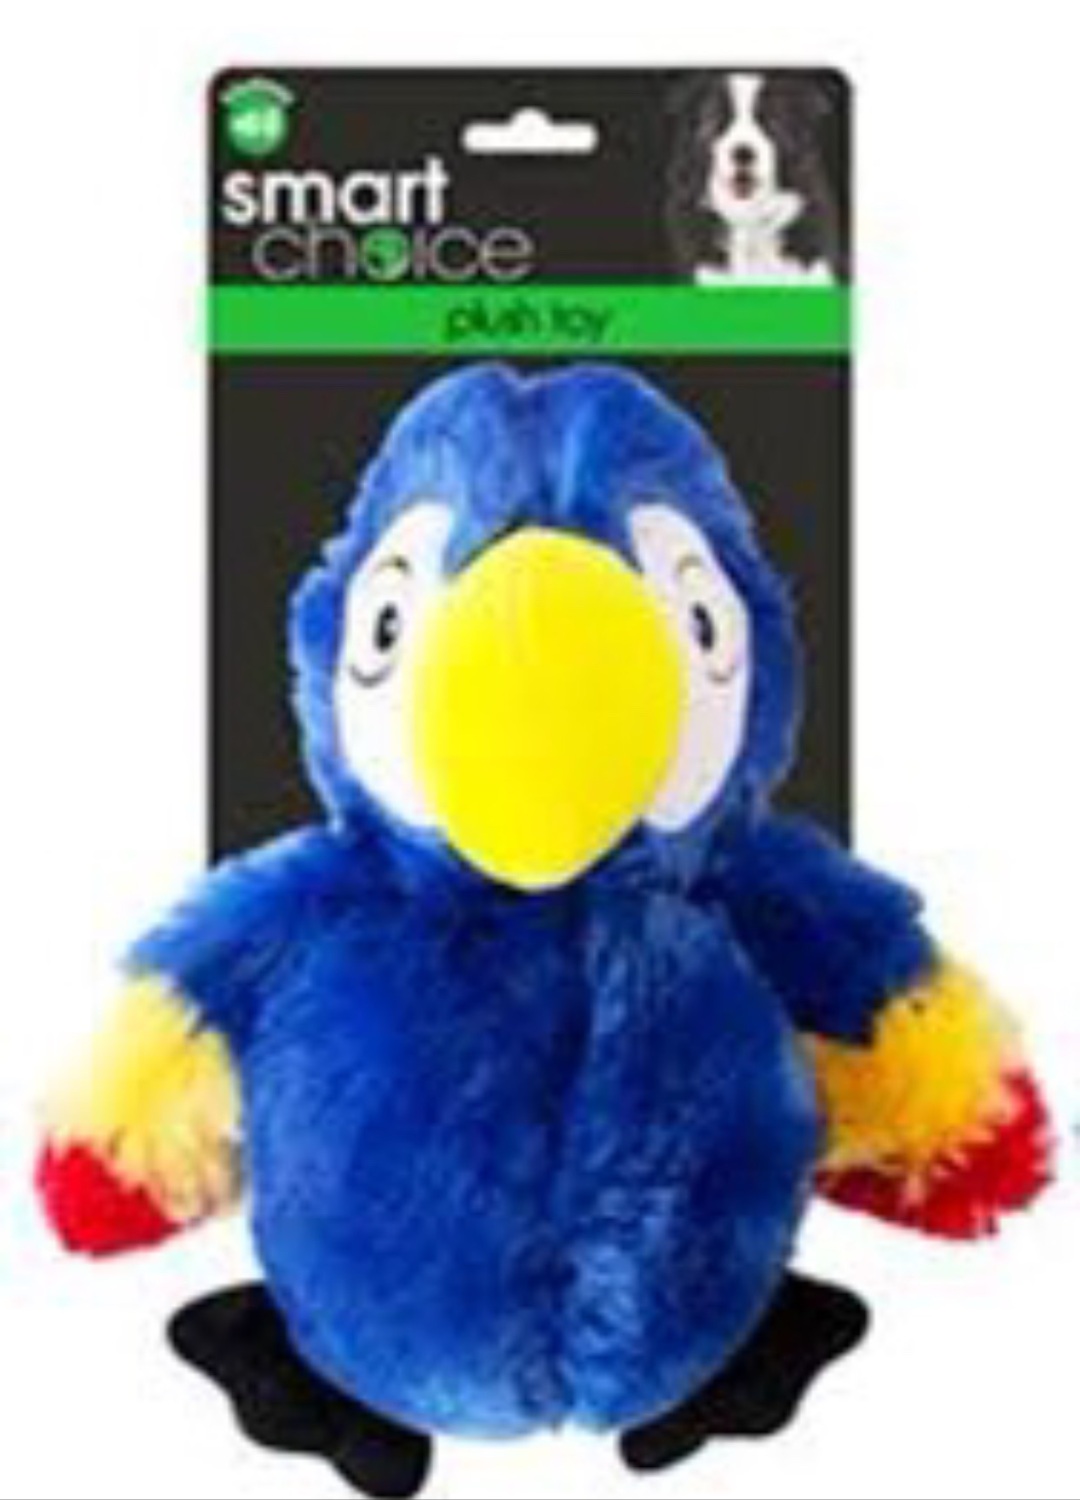 Smart Choice Squeaky Plush Parrot Dog Toy x 1 Blue